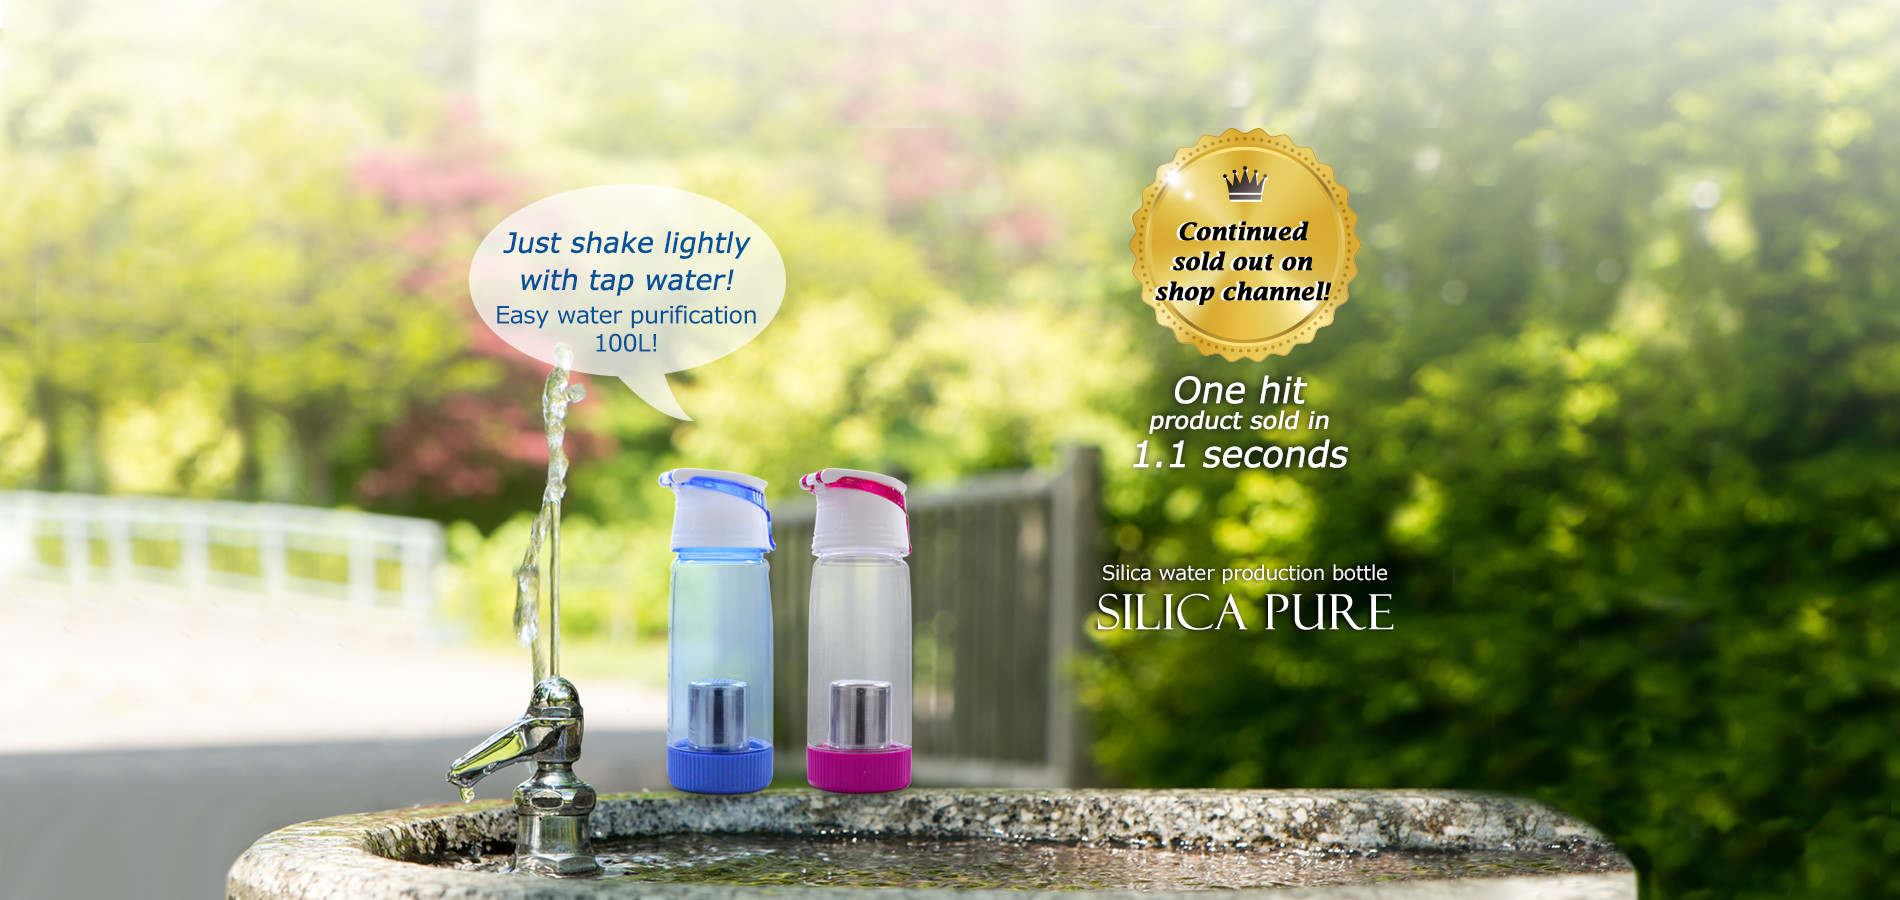 Normal tap water turns into mineral water containing silica (Silicon)